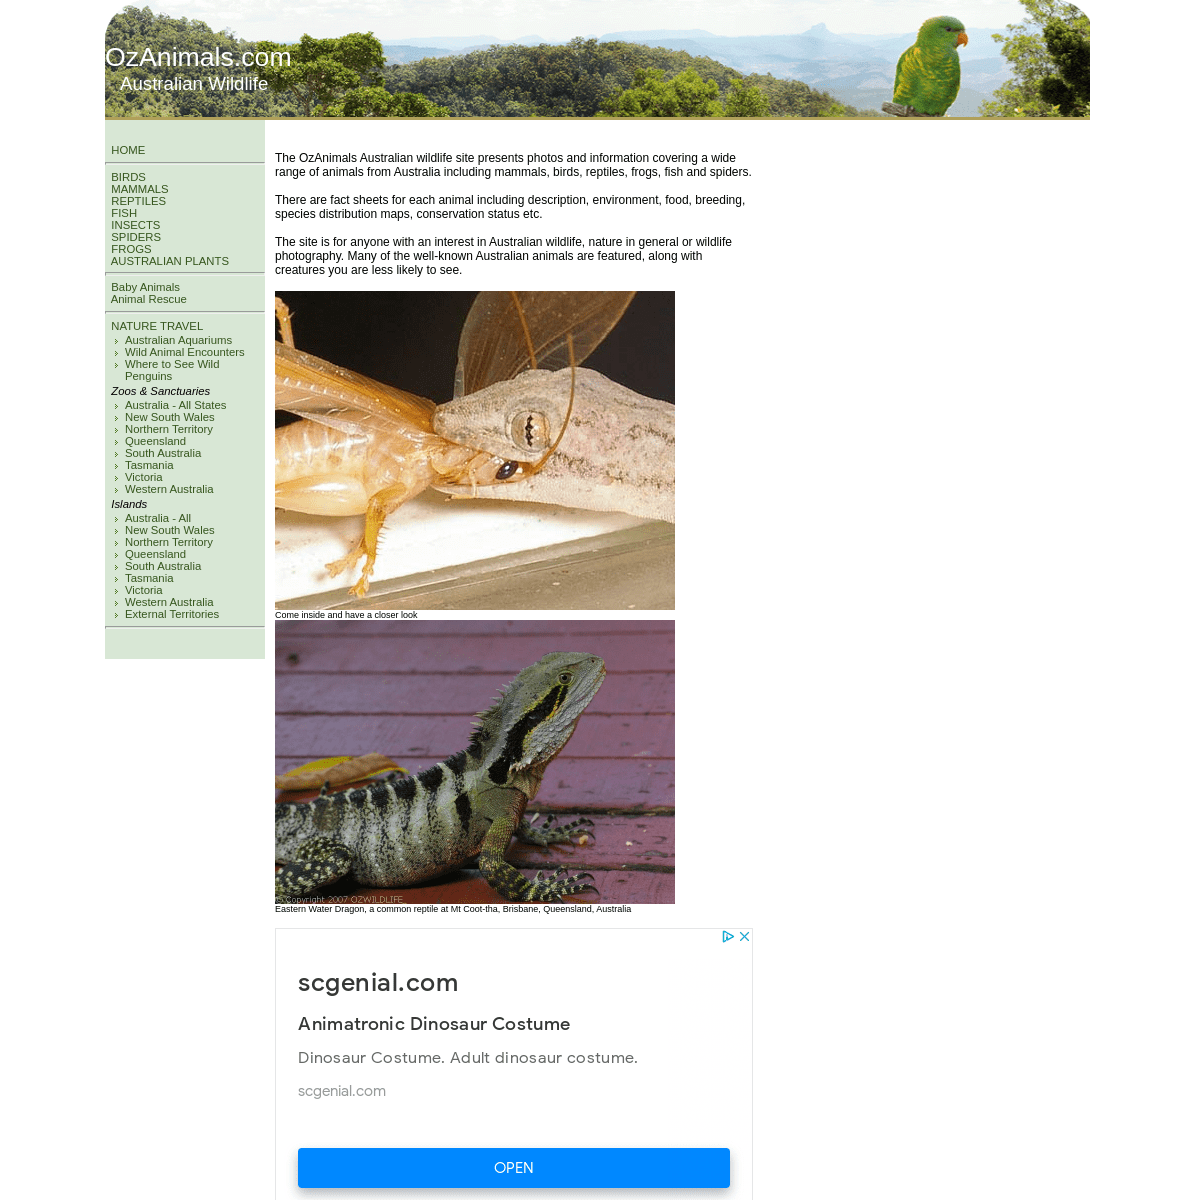 A complete backup of https://ozanimals.com